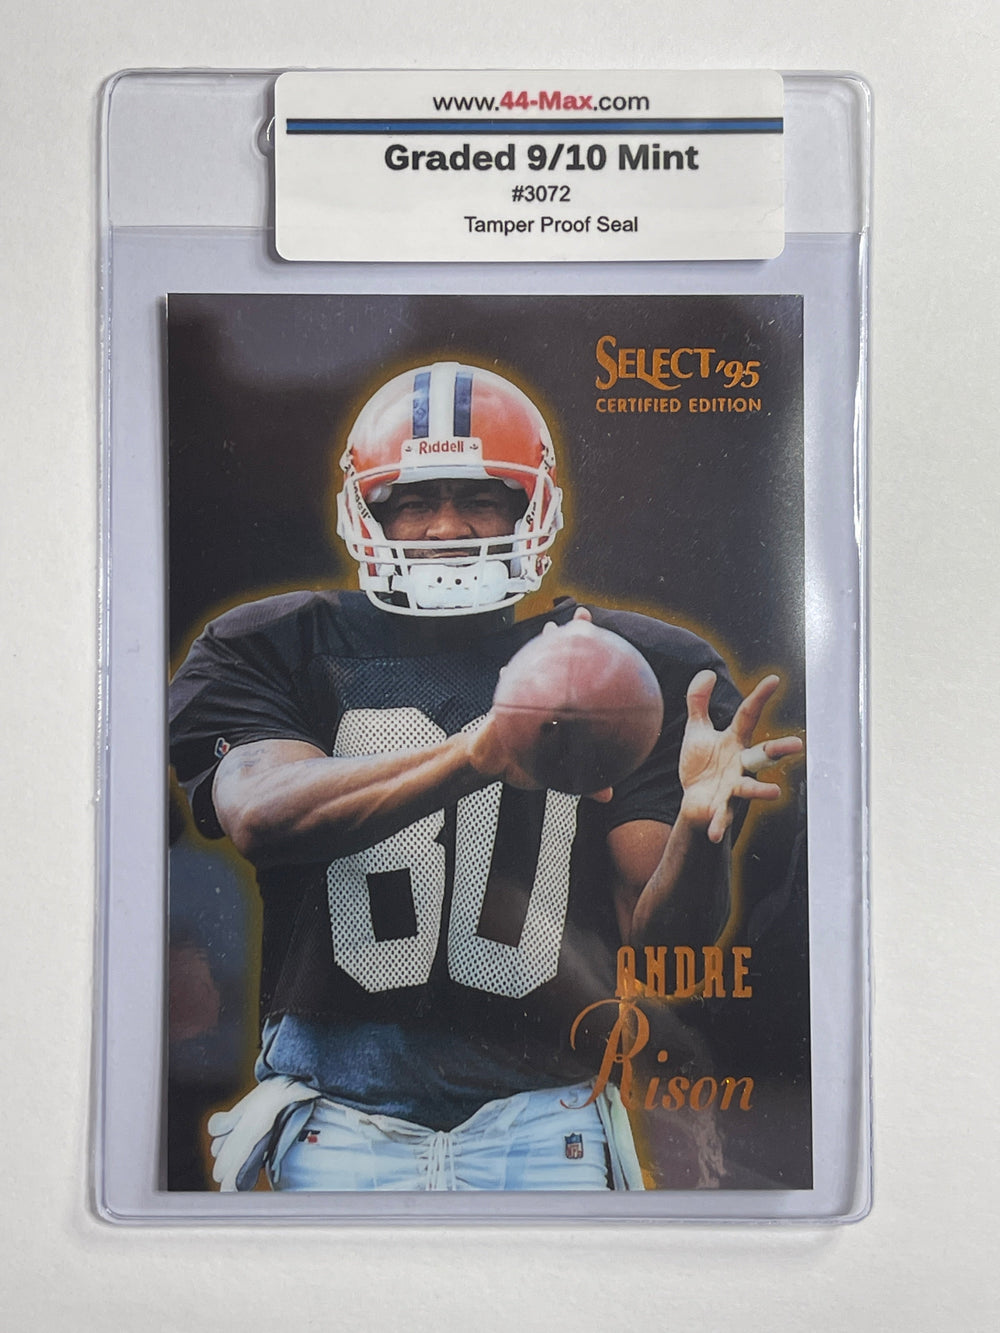 Andre Rison 1995 Select Football Card. 44-Max 9/10 Mint #3072